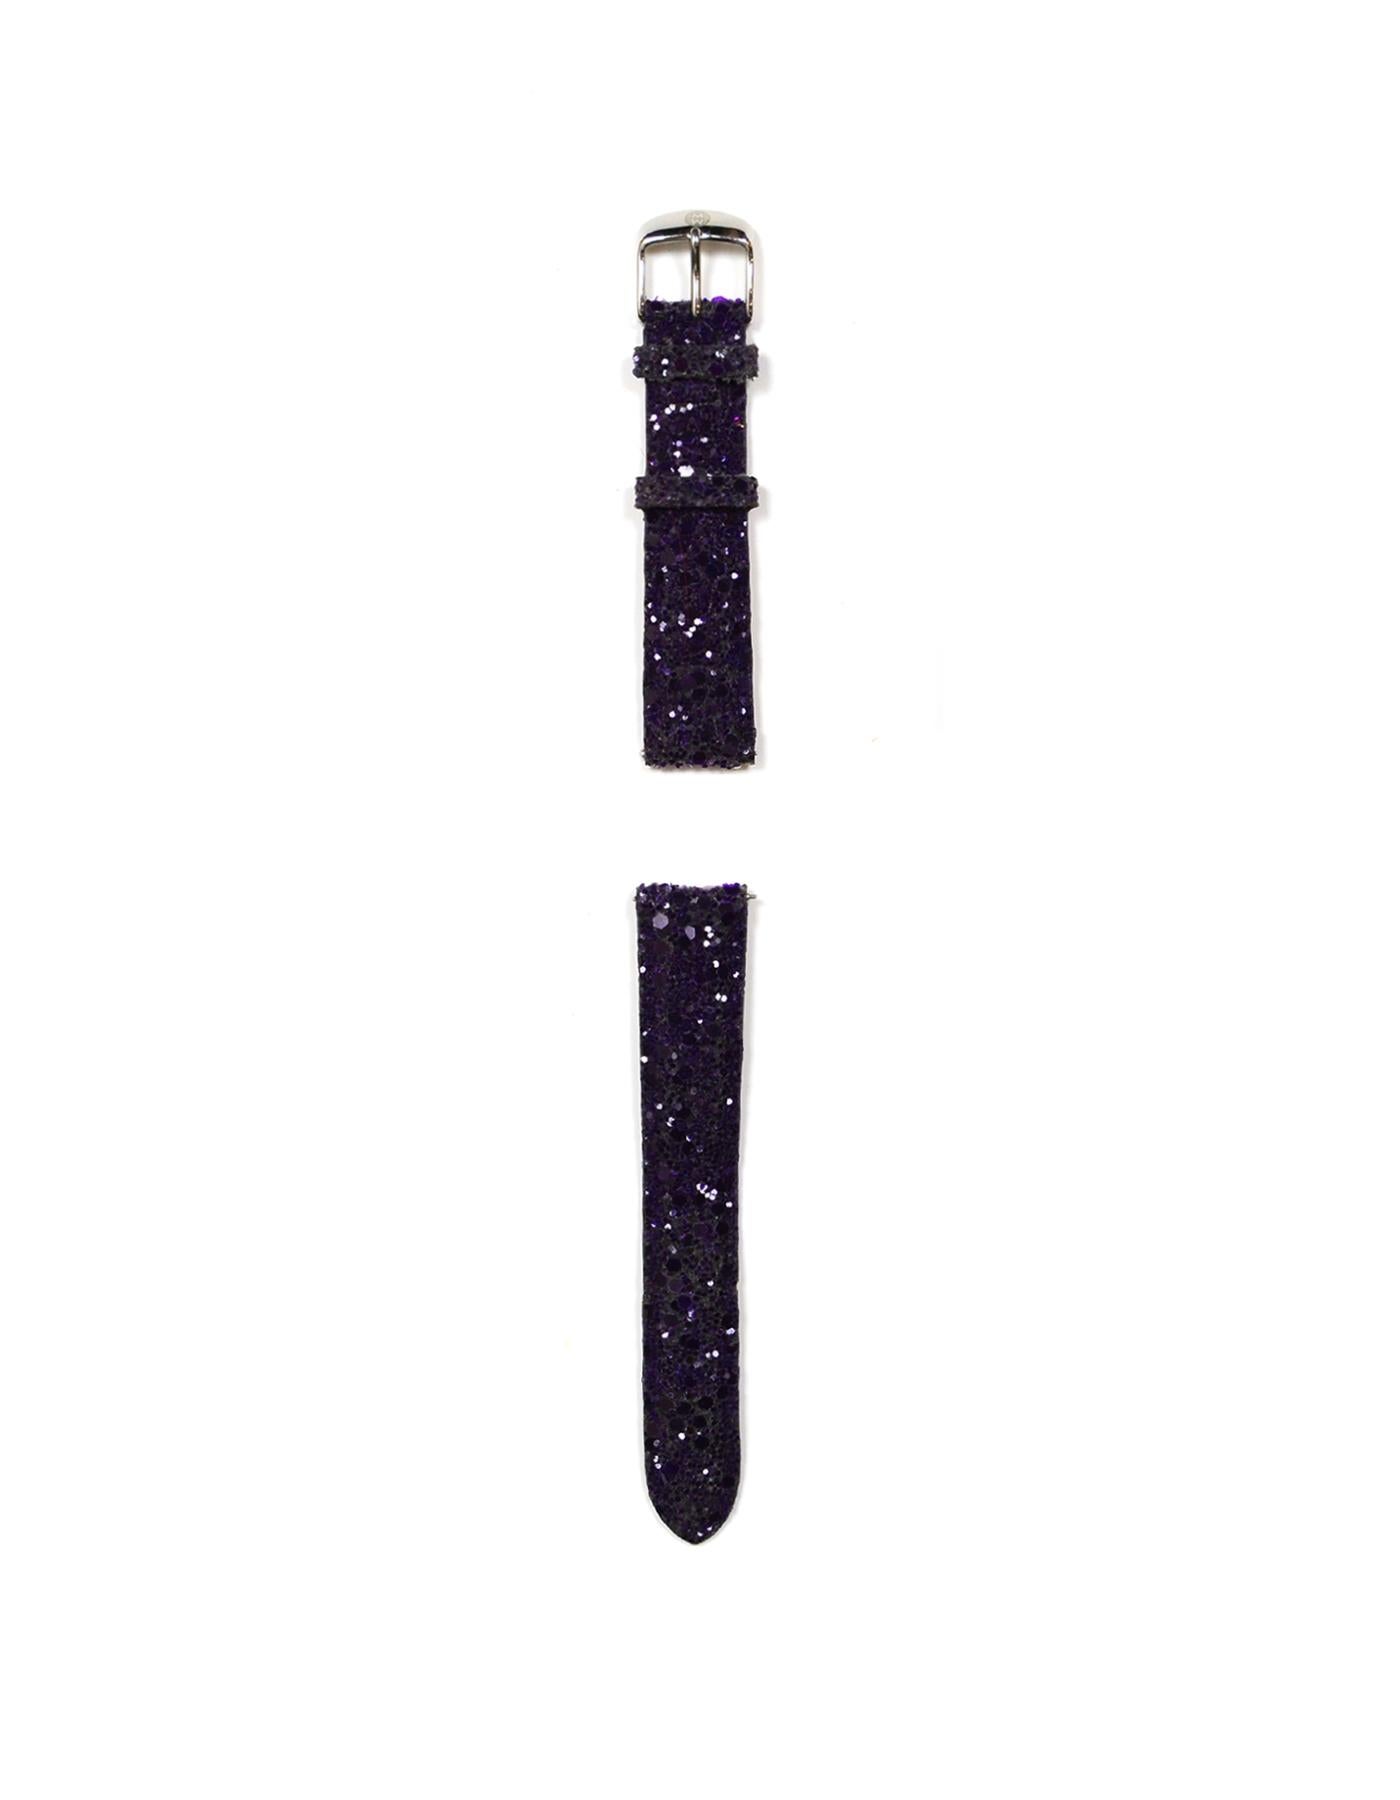 Michele Set of Three Purple Woman's Thin Watch 18MM Straps 

Made In: USA, Switzerland
Color: Purple
Materials: Glitter, Metallic, Rubber, Leather
Closure/Opening: Tang buckles
Overall Condition: Excellent pre-owned condition, with the exception of